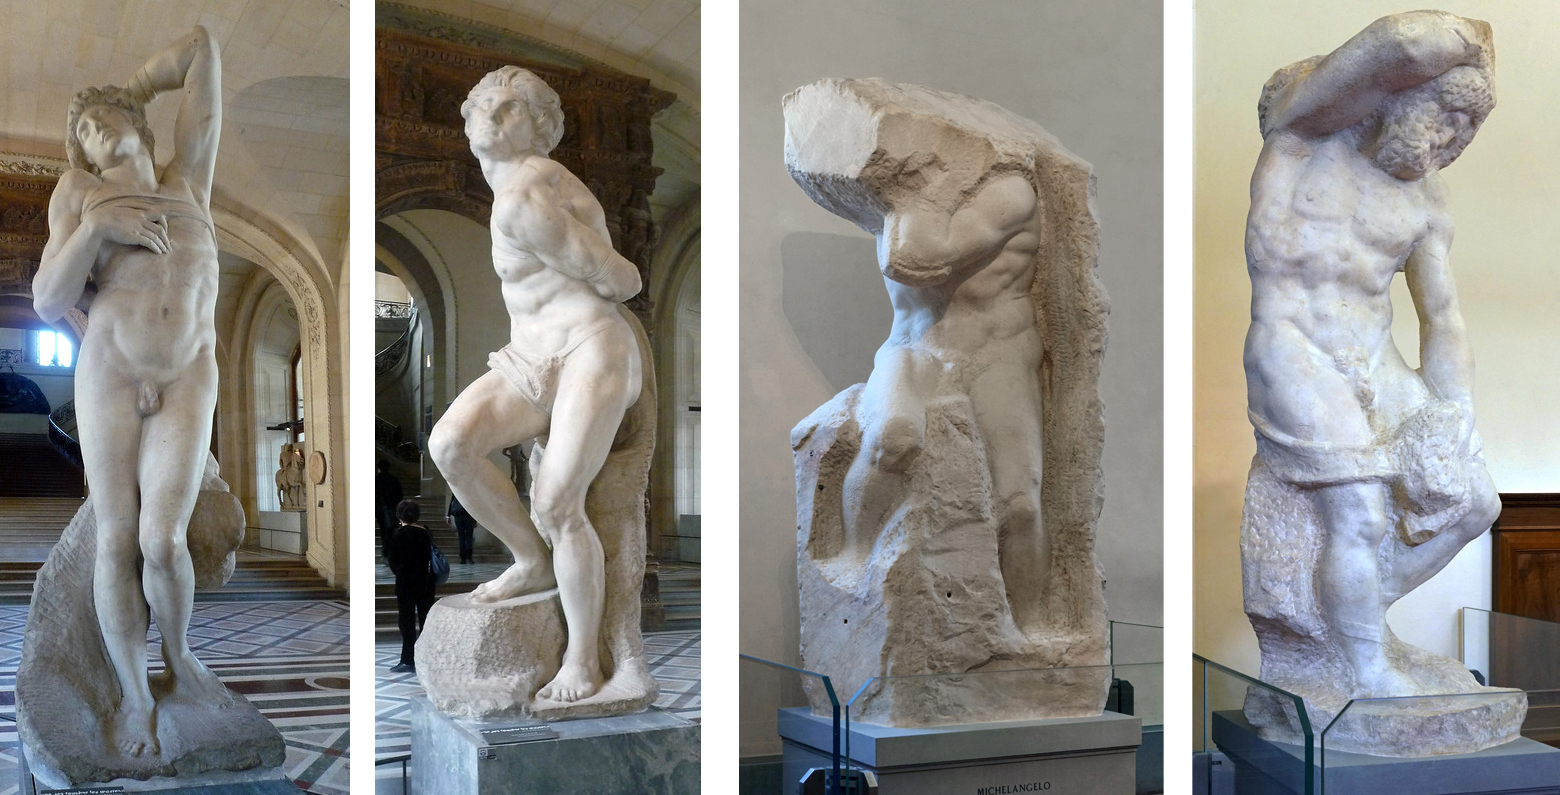 From left to right: Michelangelo, Slaves (commonly referred to as the Dying Slave and the Rebellious Slave), 1513-15, marble, 2.09 m high (Musée du Louvre, Paris, photo: Steven Zucker, CC BY-NC-SA 2.0); Captives (commonly referred to as the Atlas Captive and the Bearded Captive), c. 1530-34, marble, 2.77 m and 2.63 m high (Galleria dell’Accademia, Florence, photo: Steven Zucker, CC BY-NC-SA 2.0)